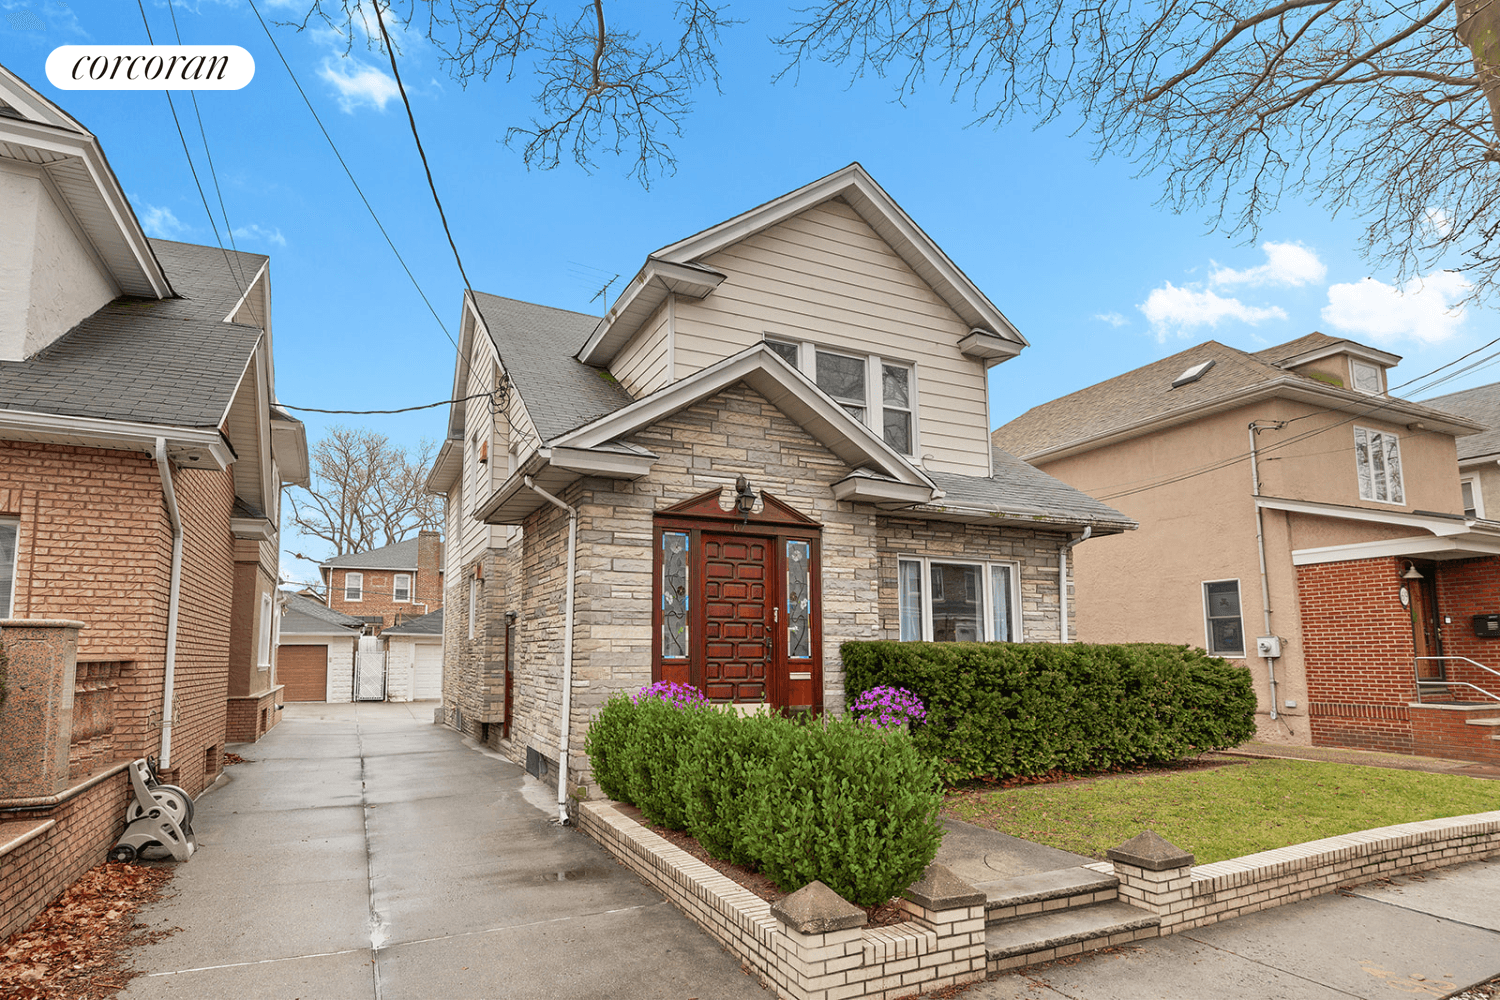 Introducing 67 77th Street a fully detached, two family house on a quiet, tree lined street in prime Bay Ridge !